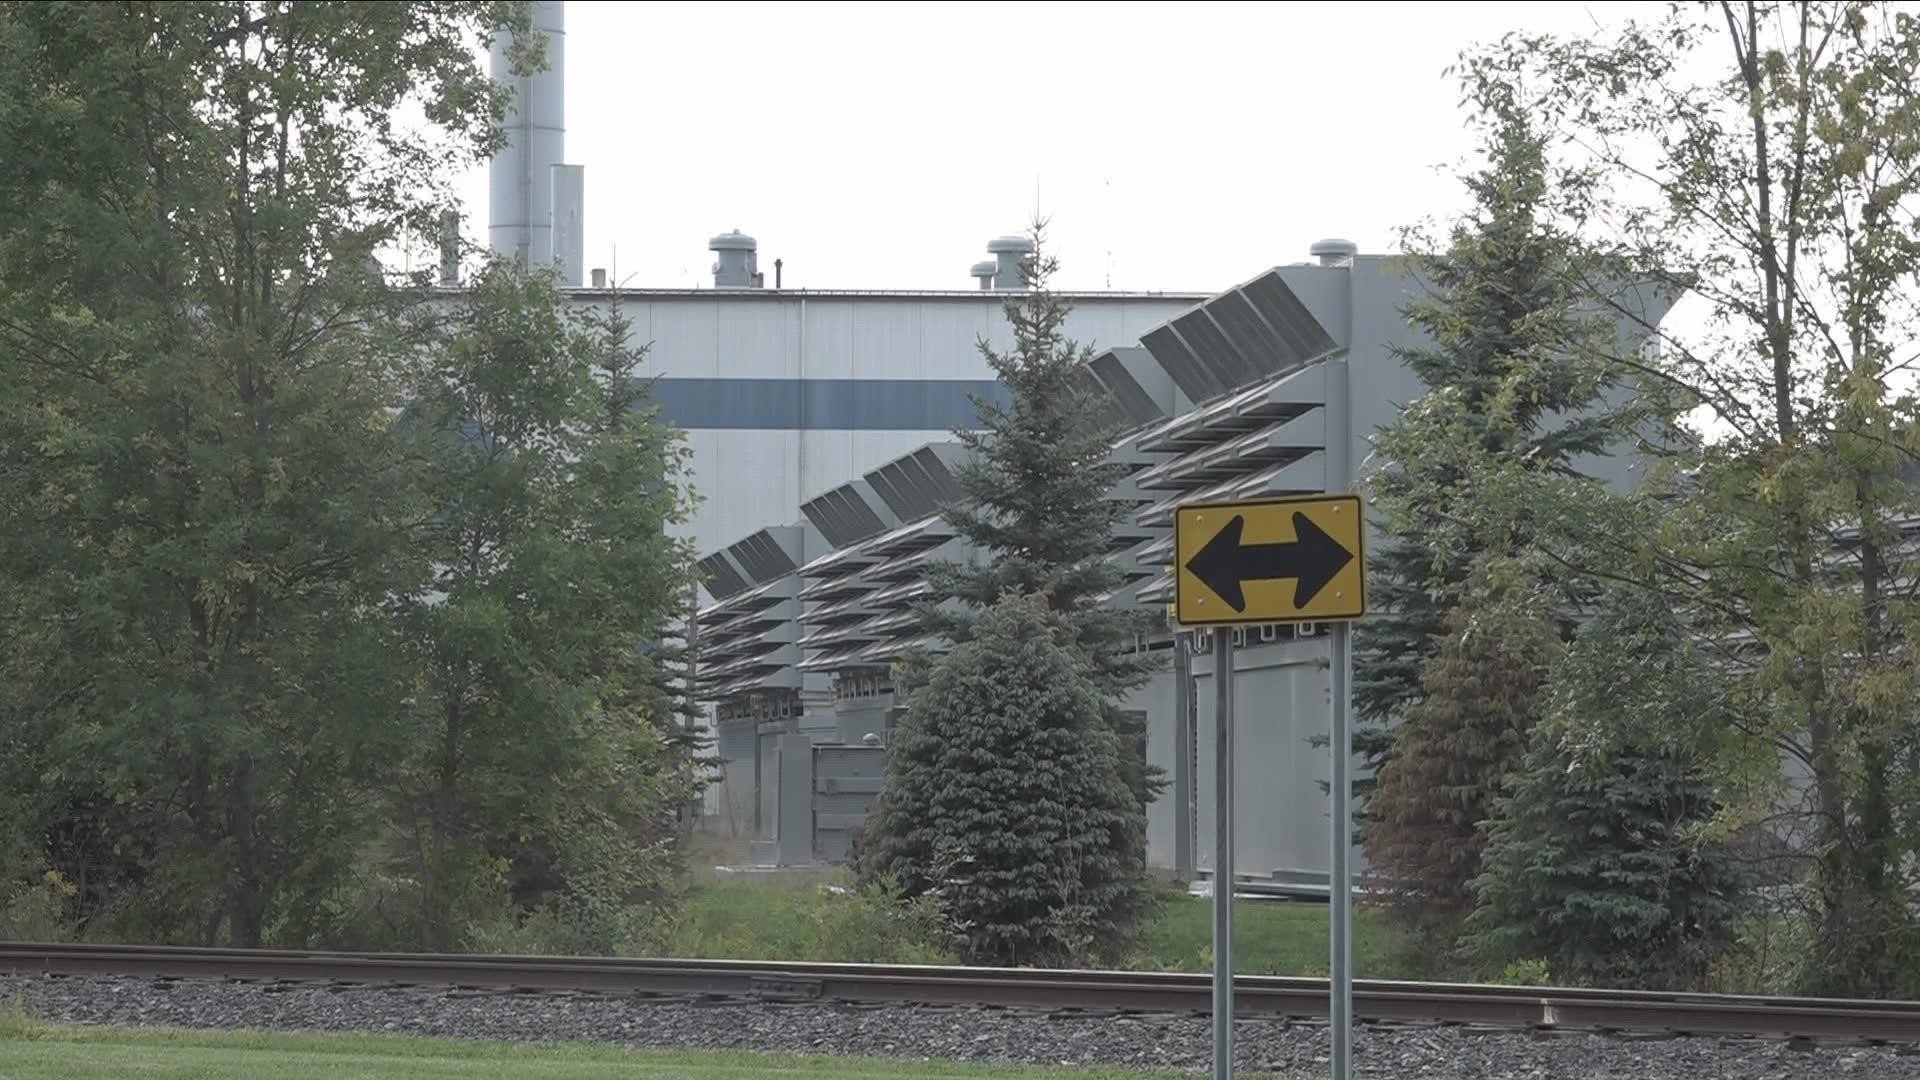 Neighbors of the Digihost facility have been voicing complaints over the noise the plant produces.